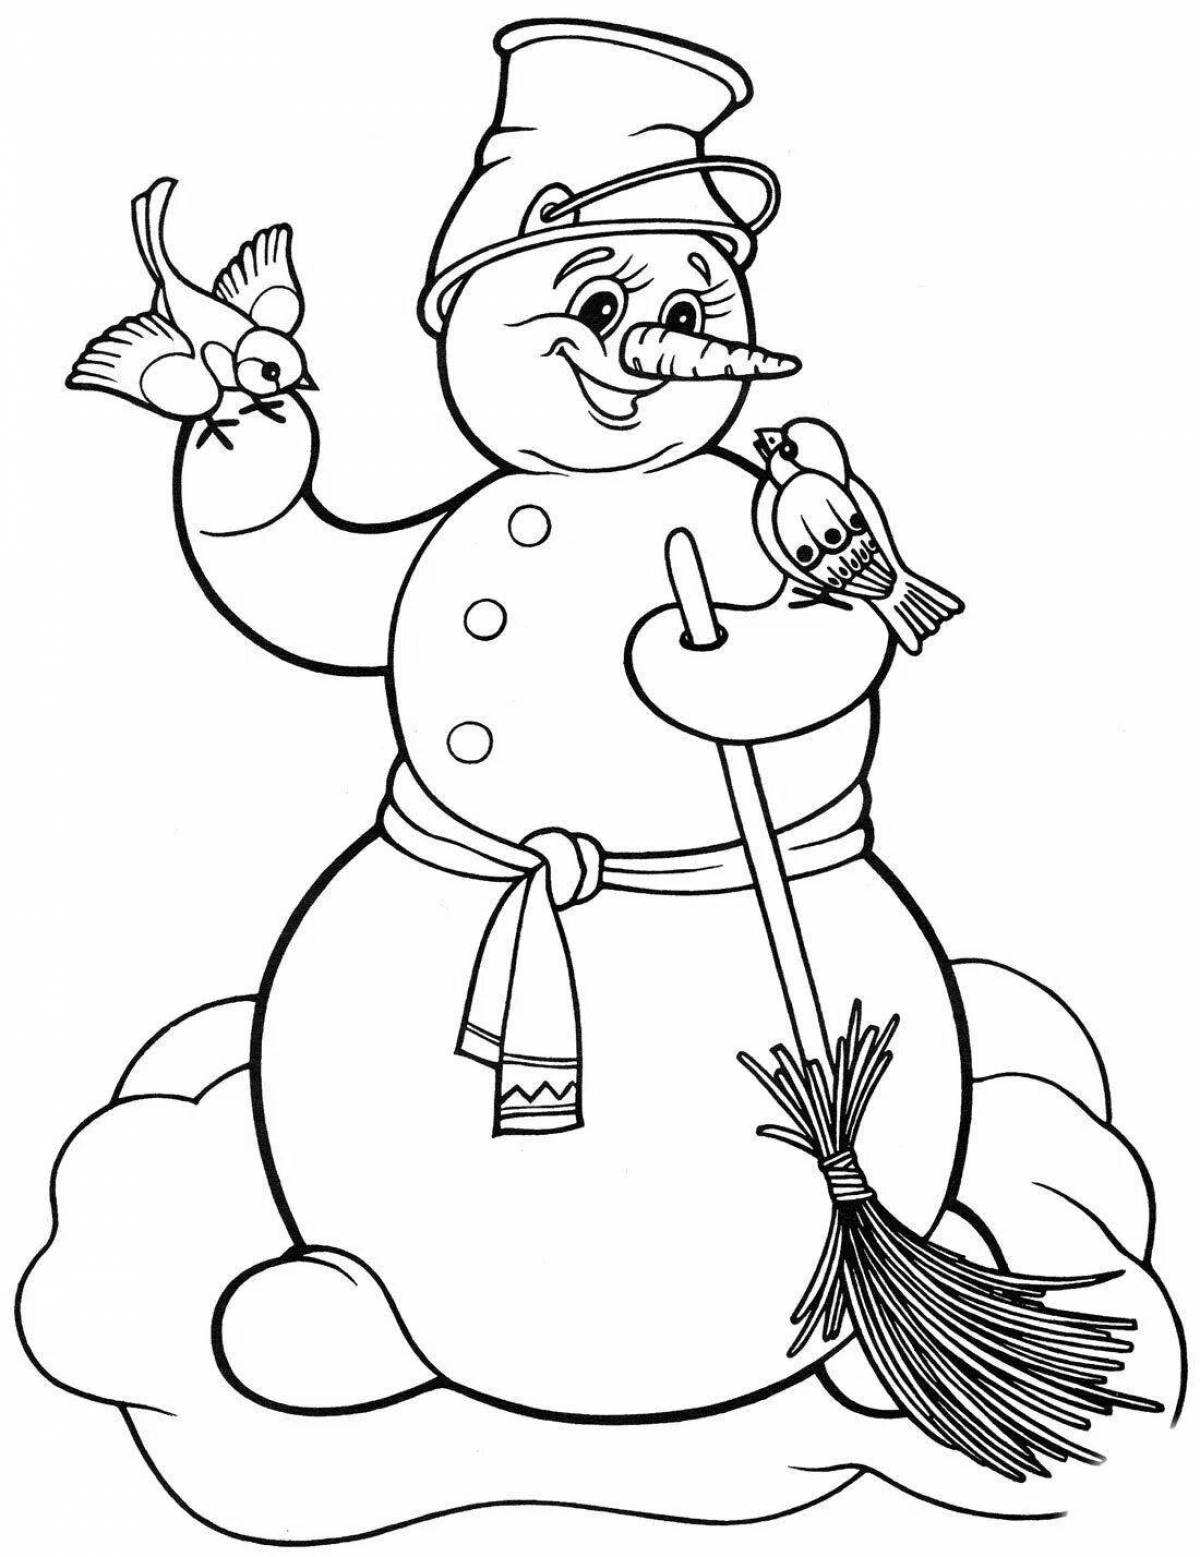 Coloring day cheerful snowman